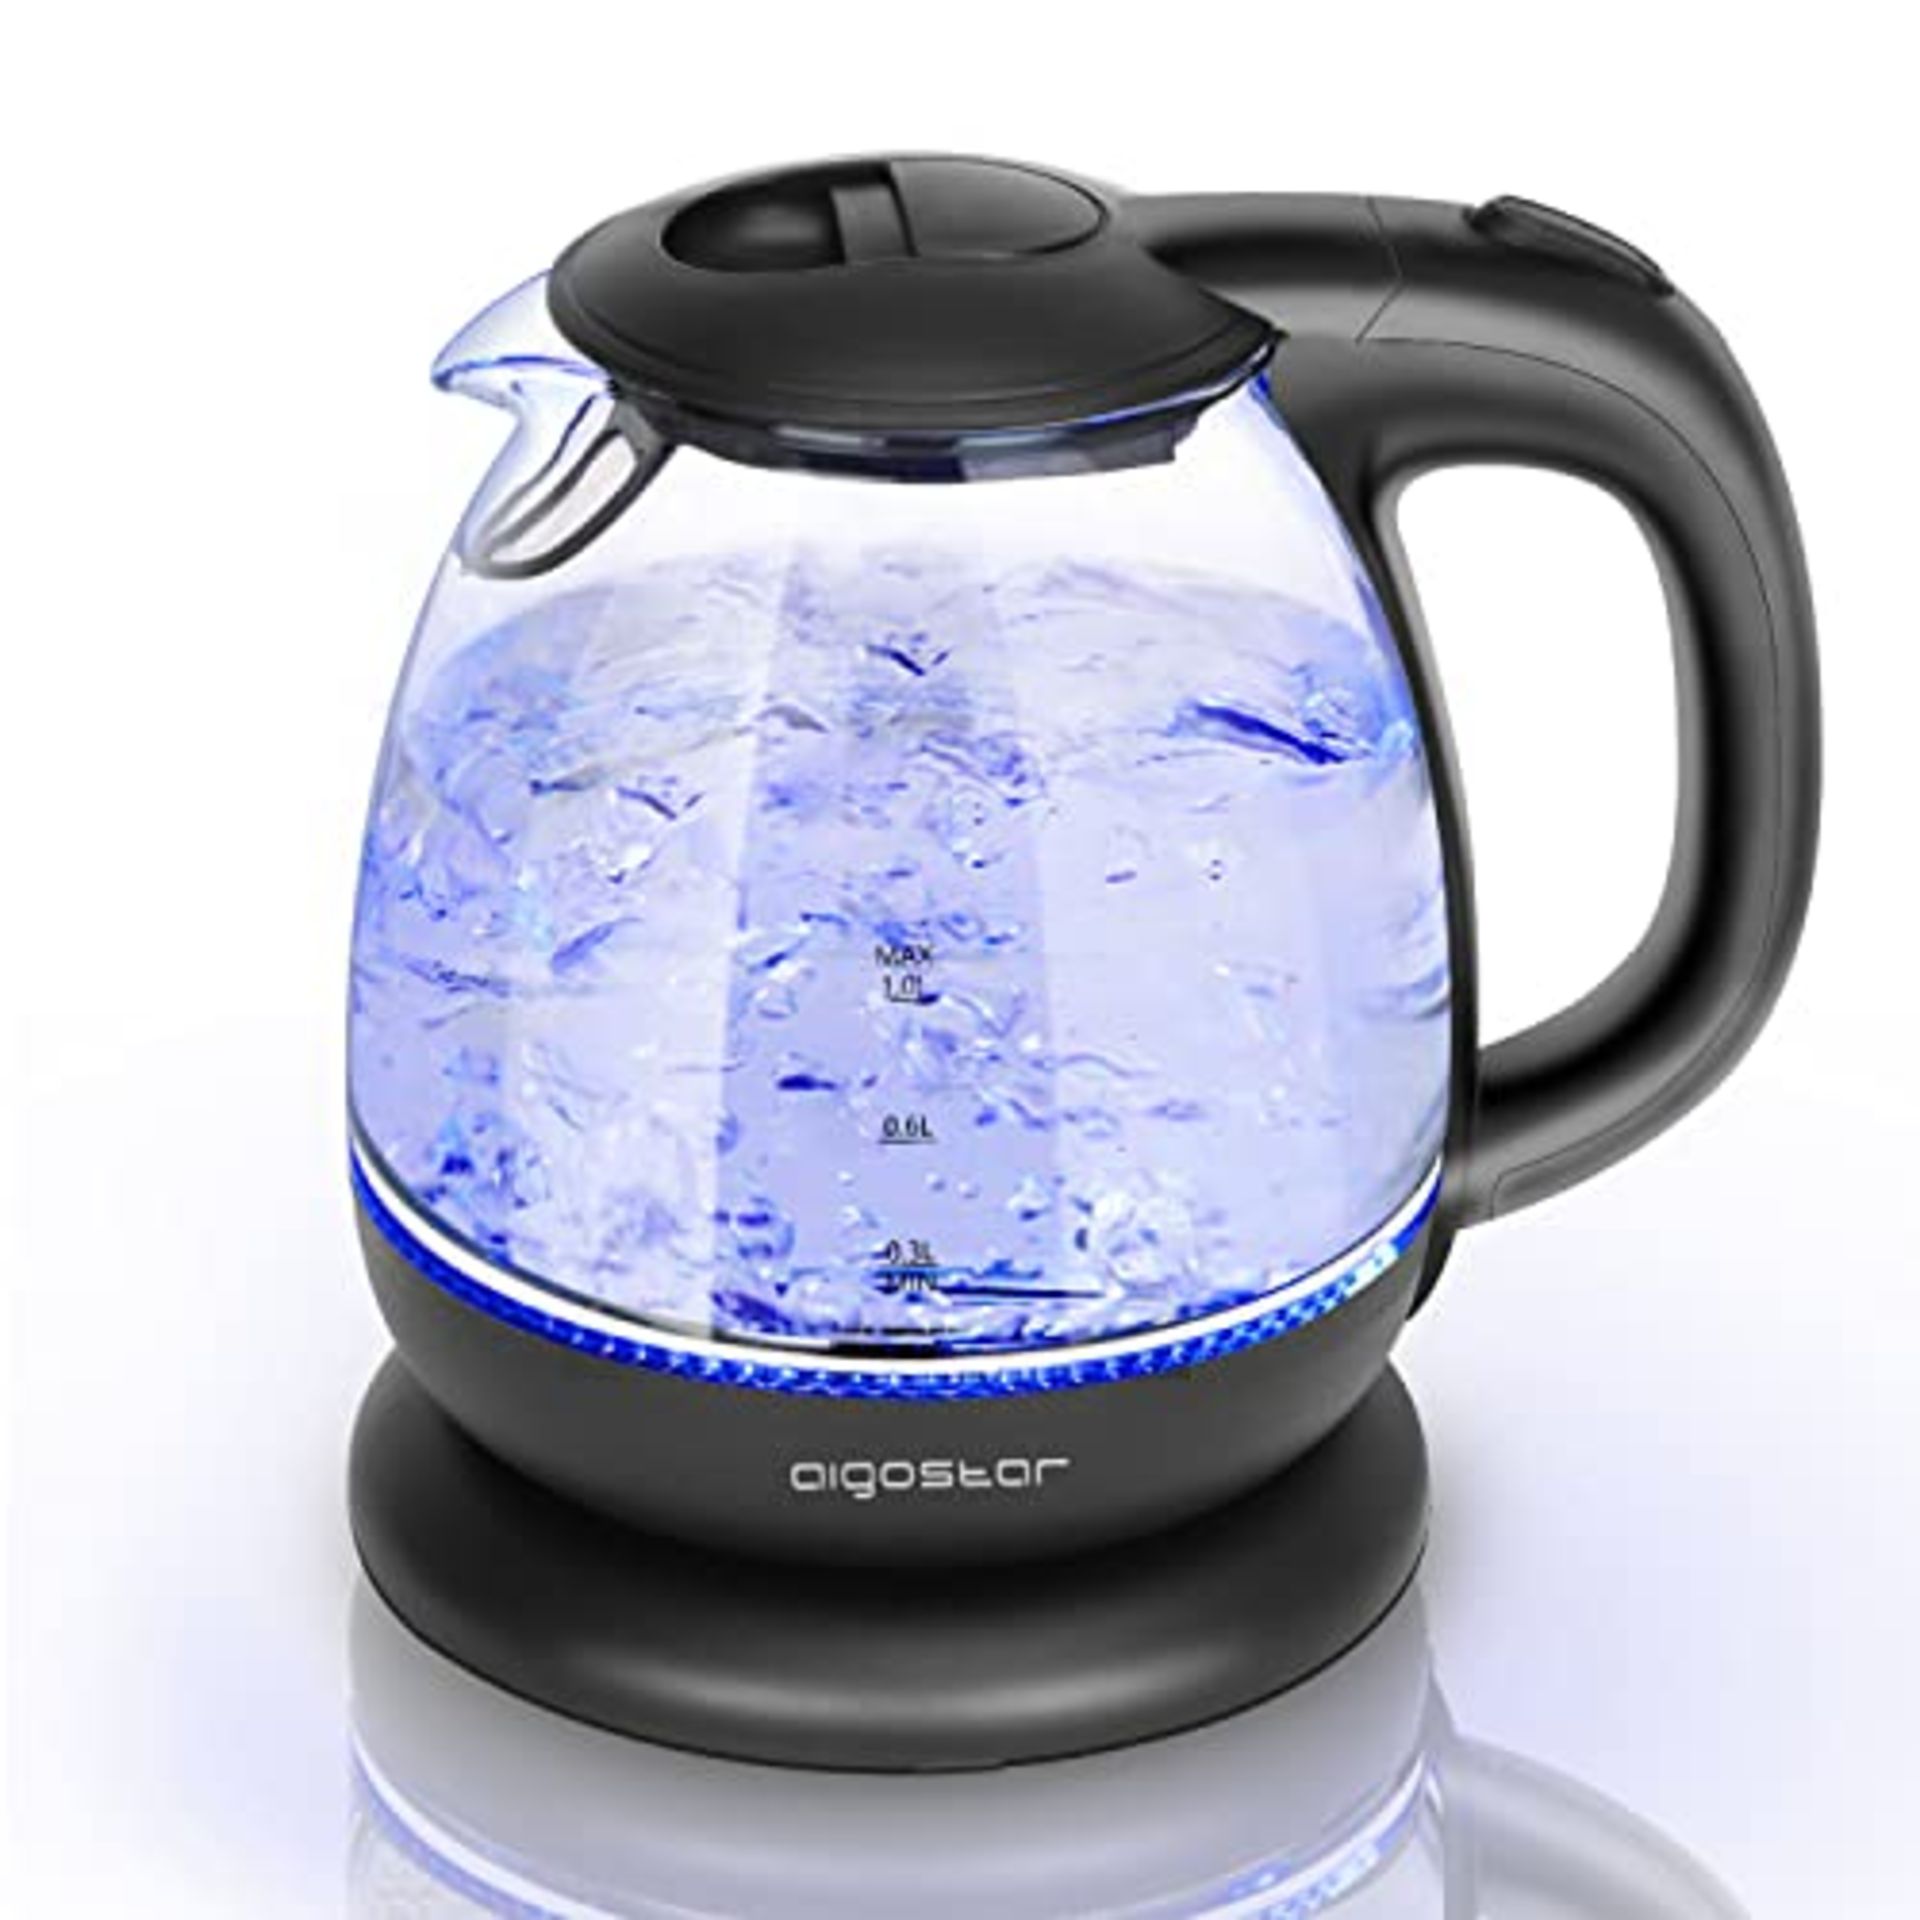 Aigostar Small Electric Kettle, 1.0L Black Glass Kettle Cordless, Compact Mini Clear W